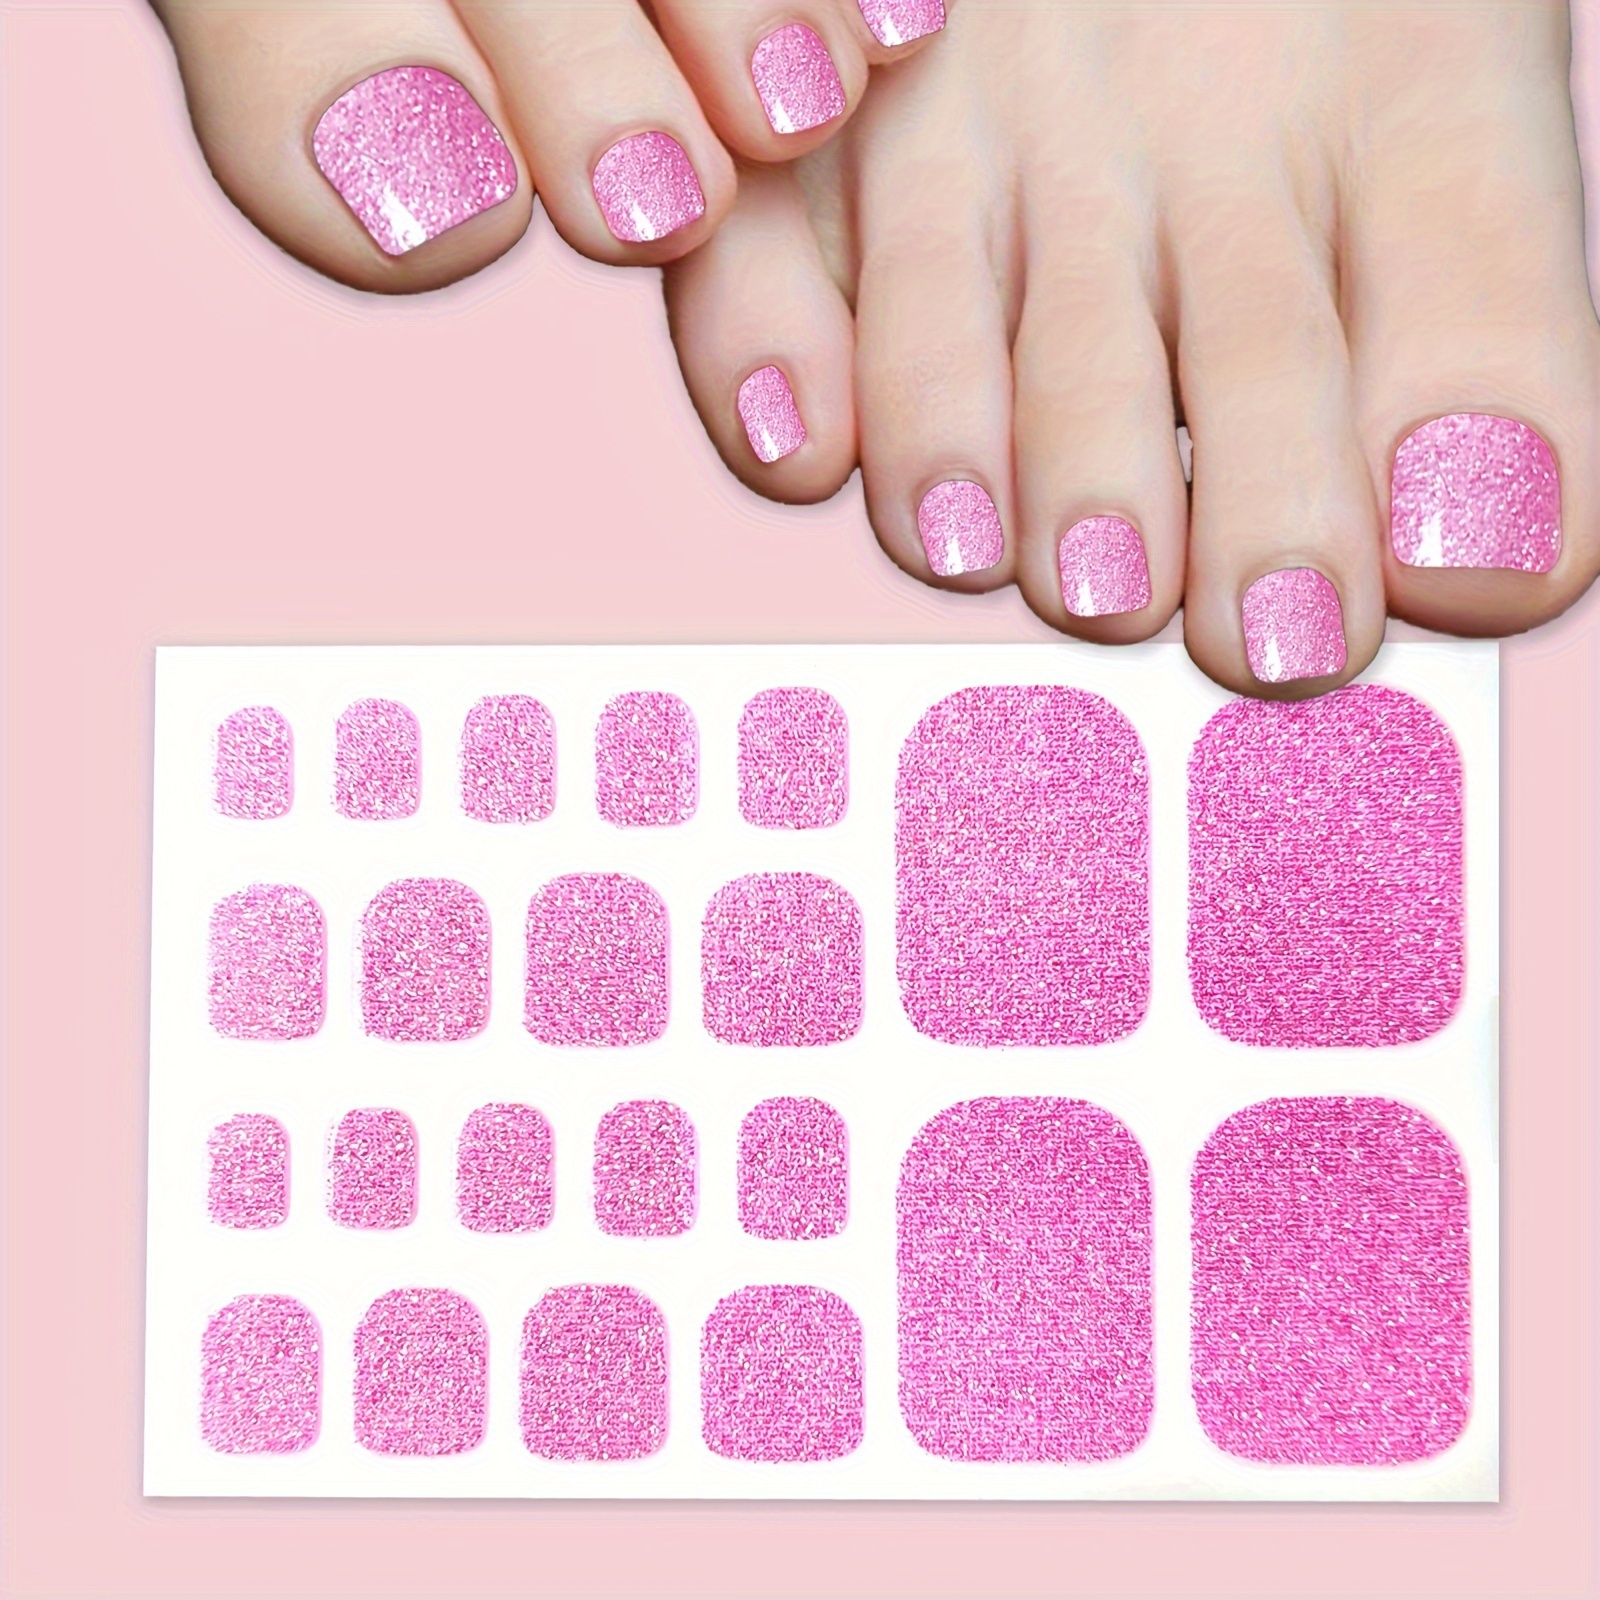 

1 Sheet Solid Pink Glitter Toenail Polish Strips, Full Wrap Self-adhesive Nail Art Stickers For Women & Girls, Diy Manicure Decals With Random Color Nail File Accessory